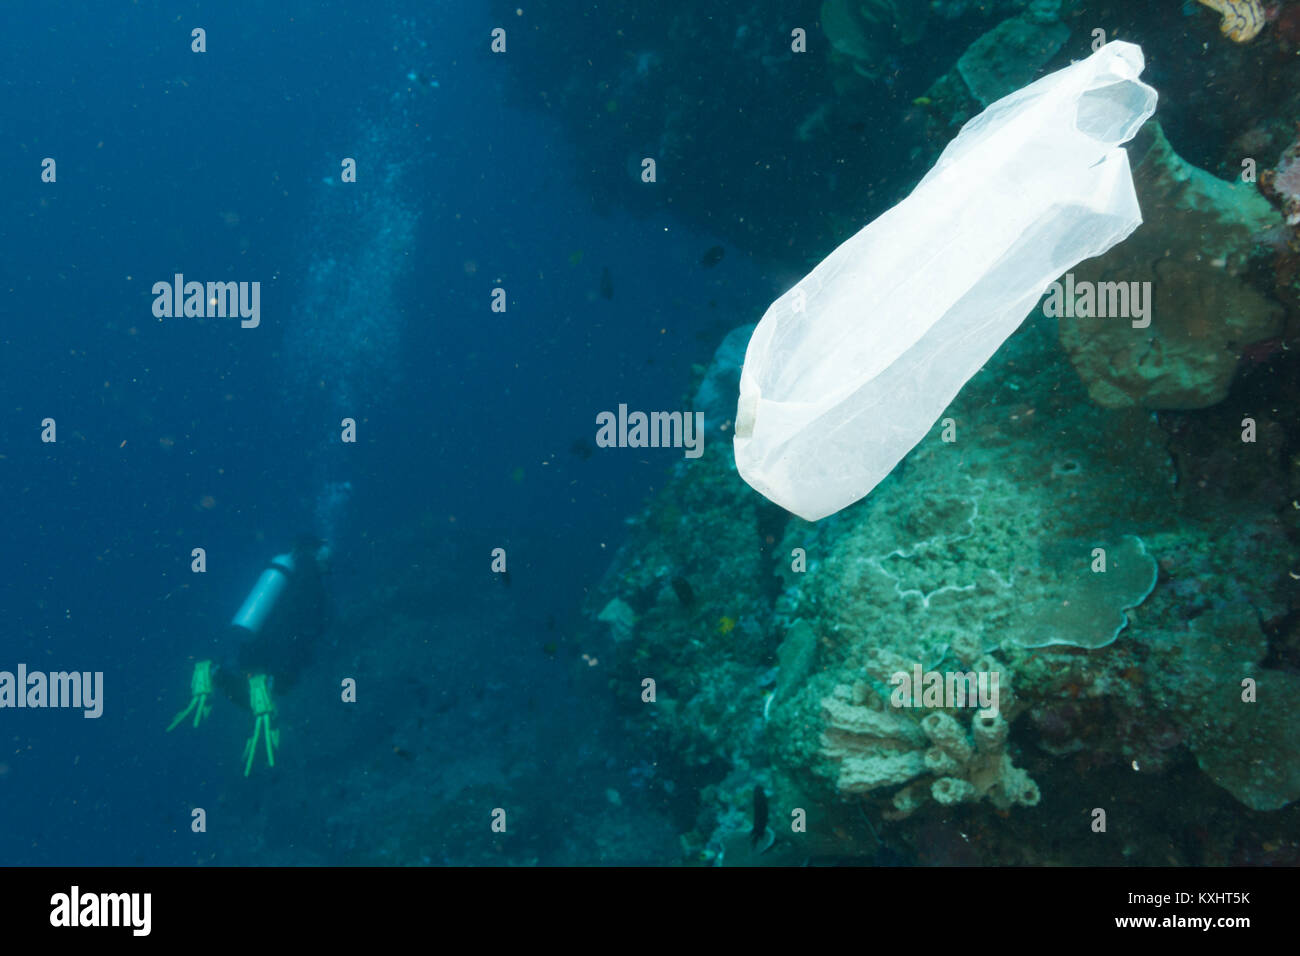 A plastic bag floats in the sea after being discarded, Bunaken National Marine Park, North Sulawesi, Indonesia Stock Photo